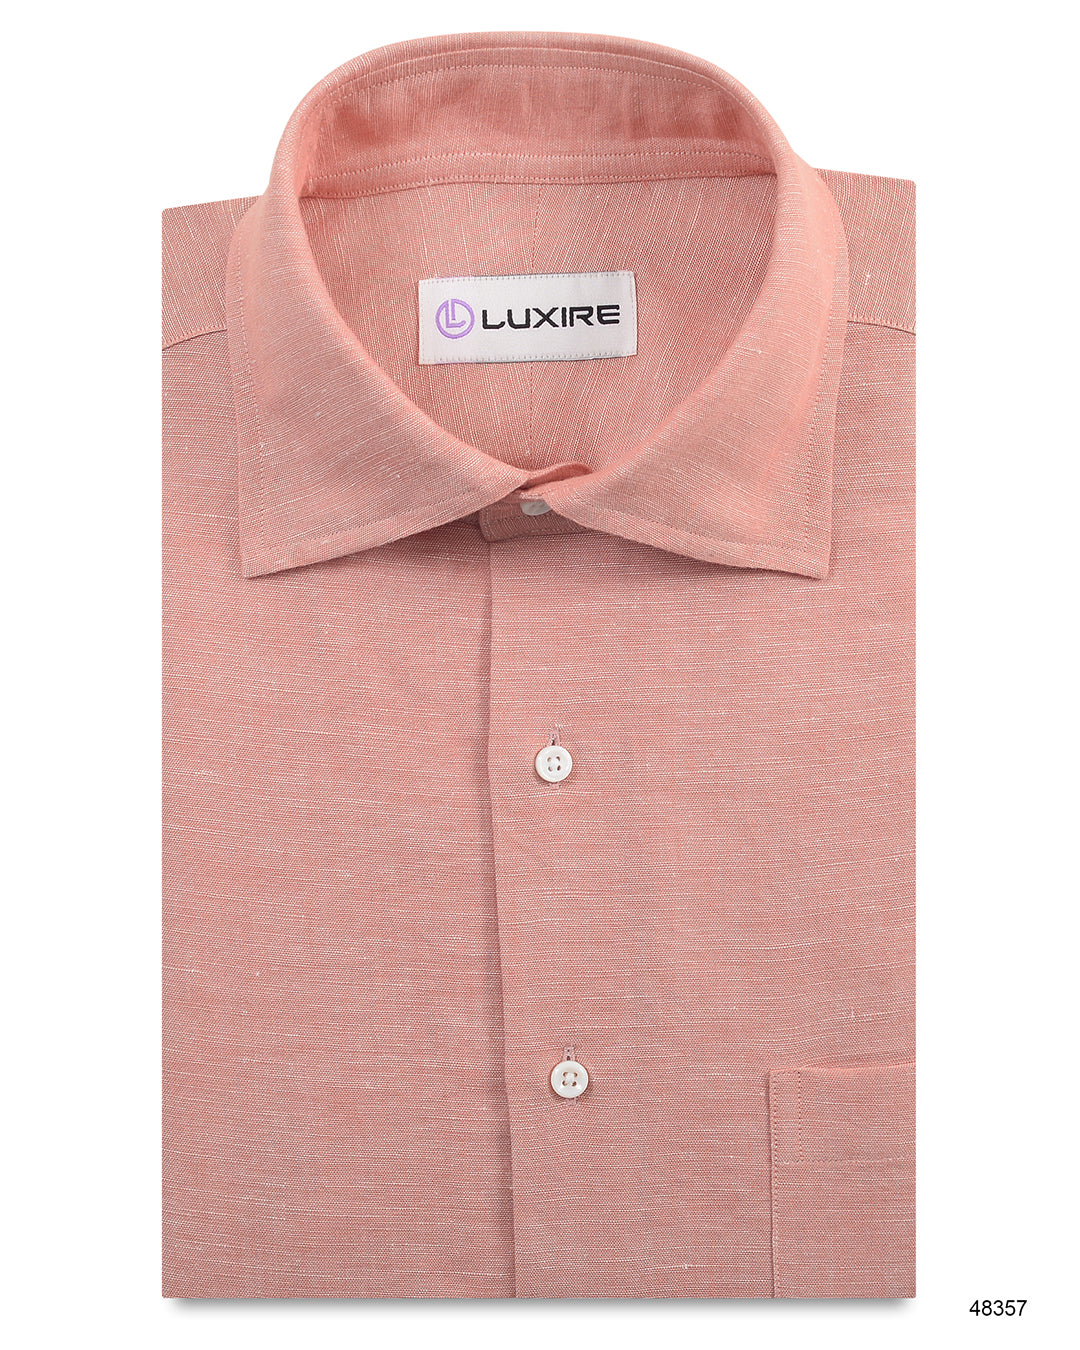 Front of the custom linen shirt for men in plain red chambray by Luxire Clothing